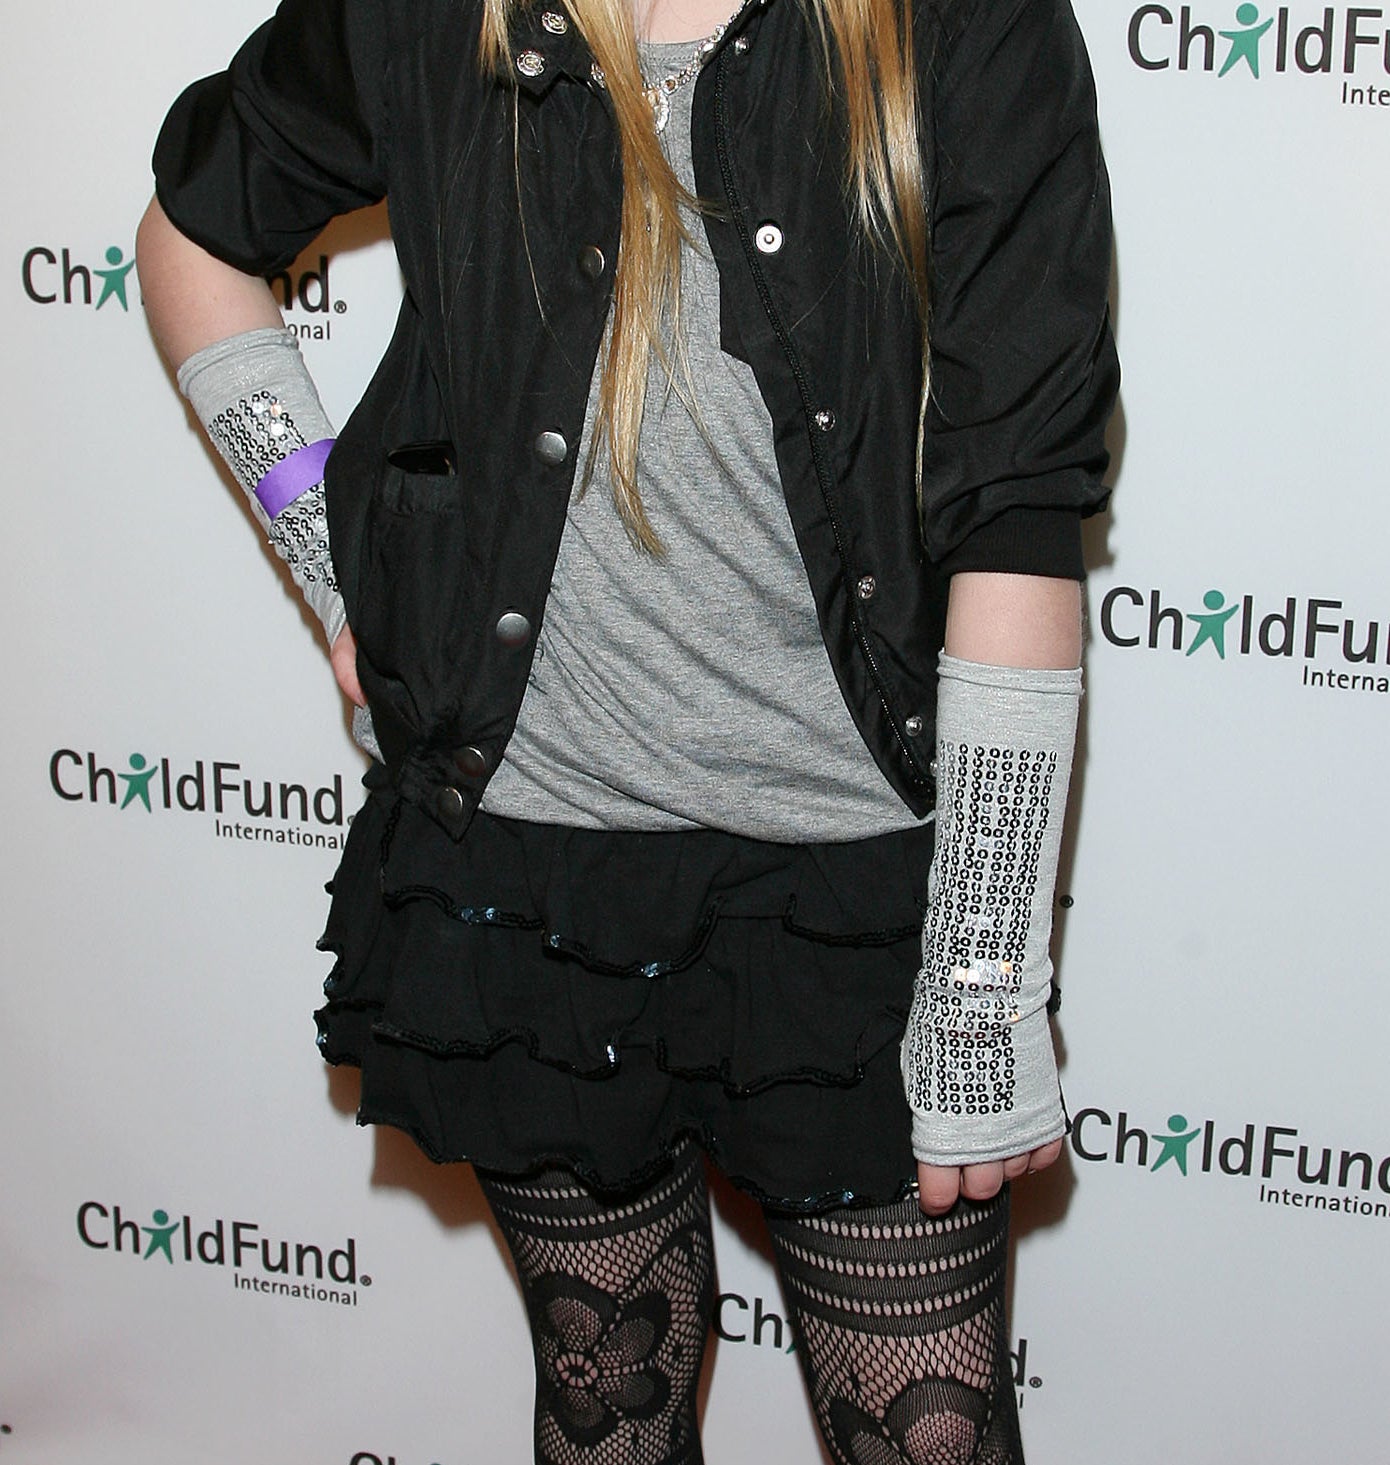 Sabrina Carpenter as a kid in a dark jacket, shirt, frilly black skirt, and patterned tights, standing on the red carpet